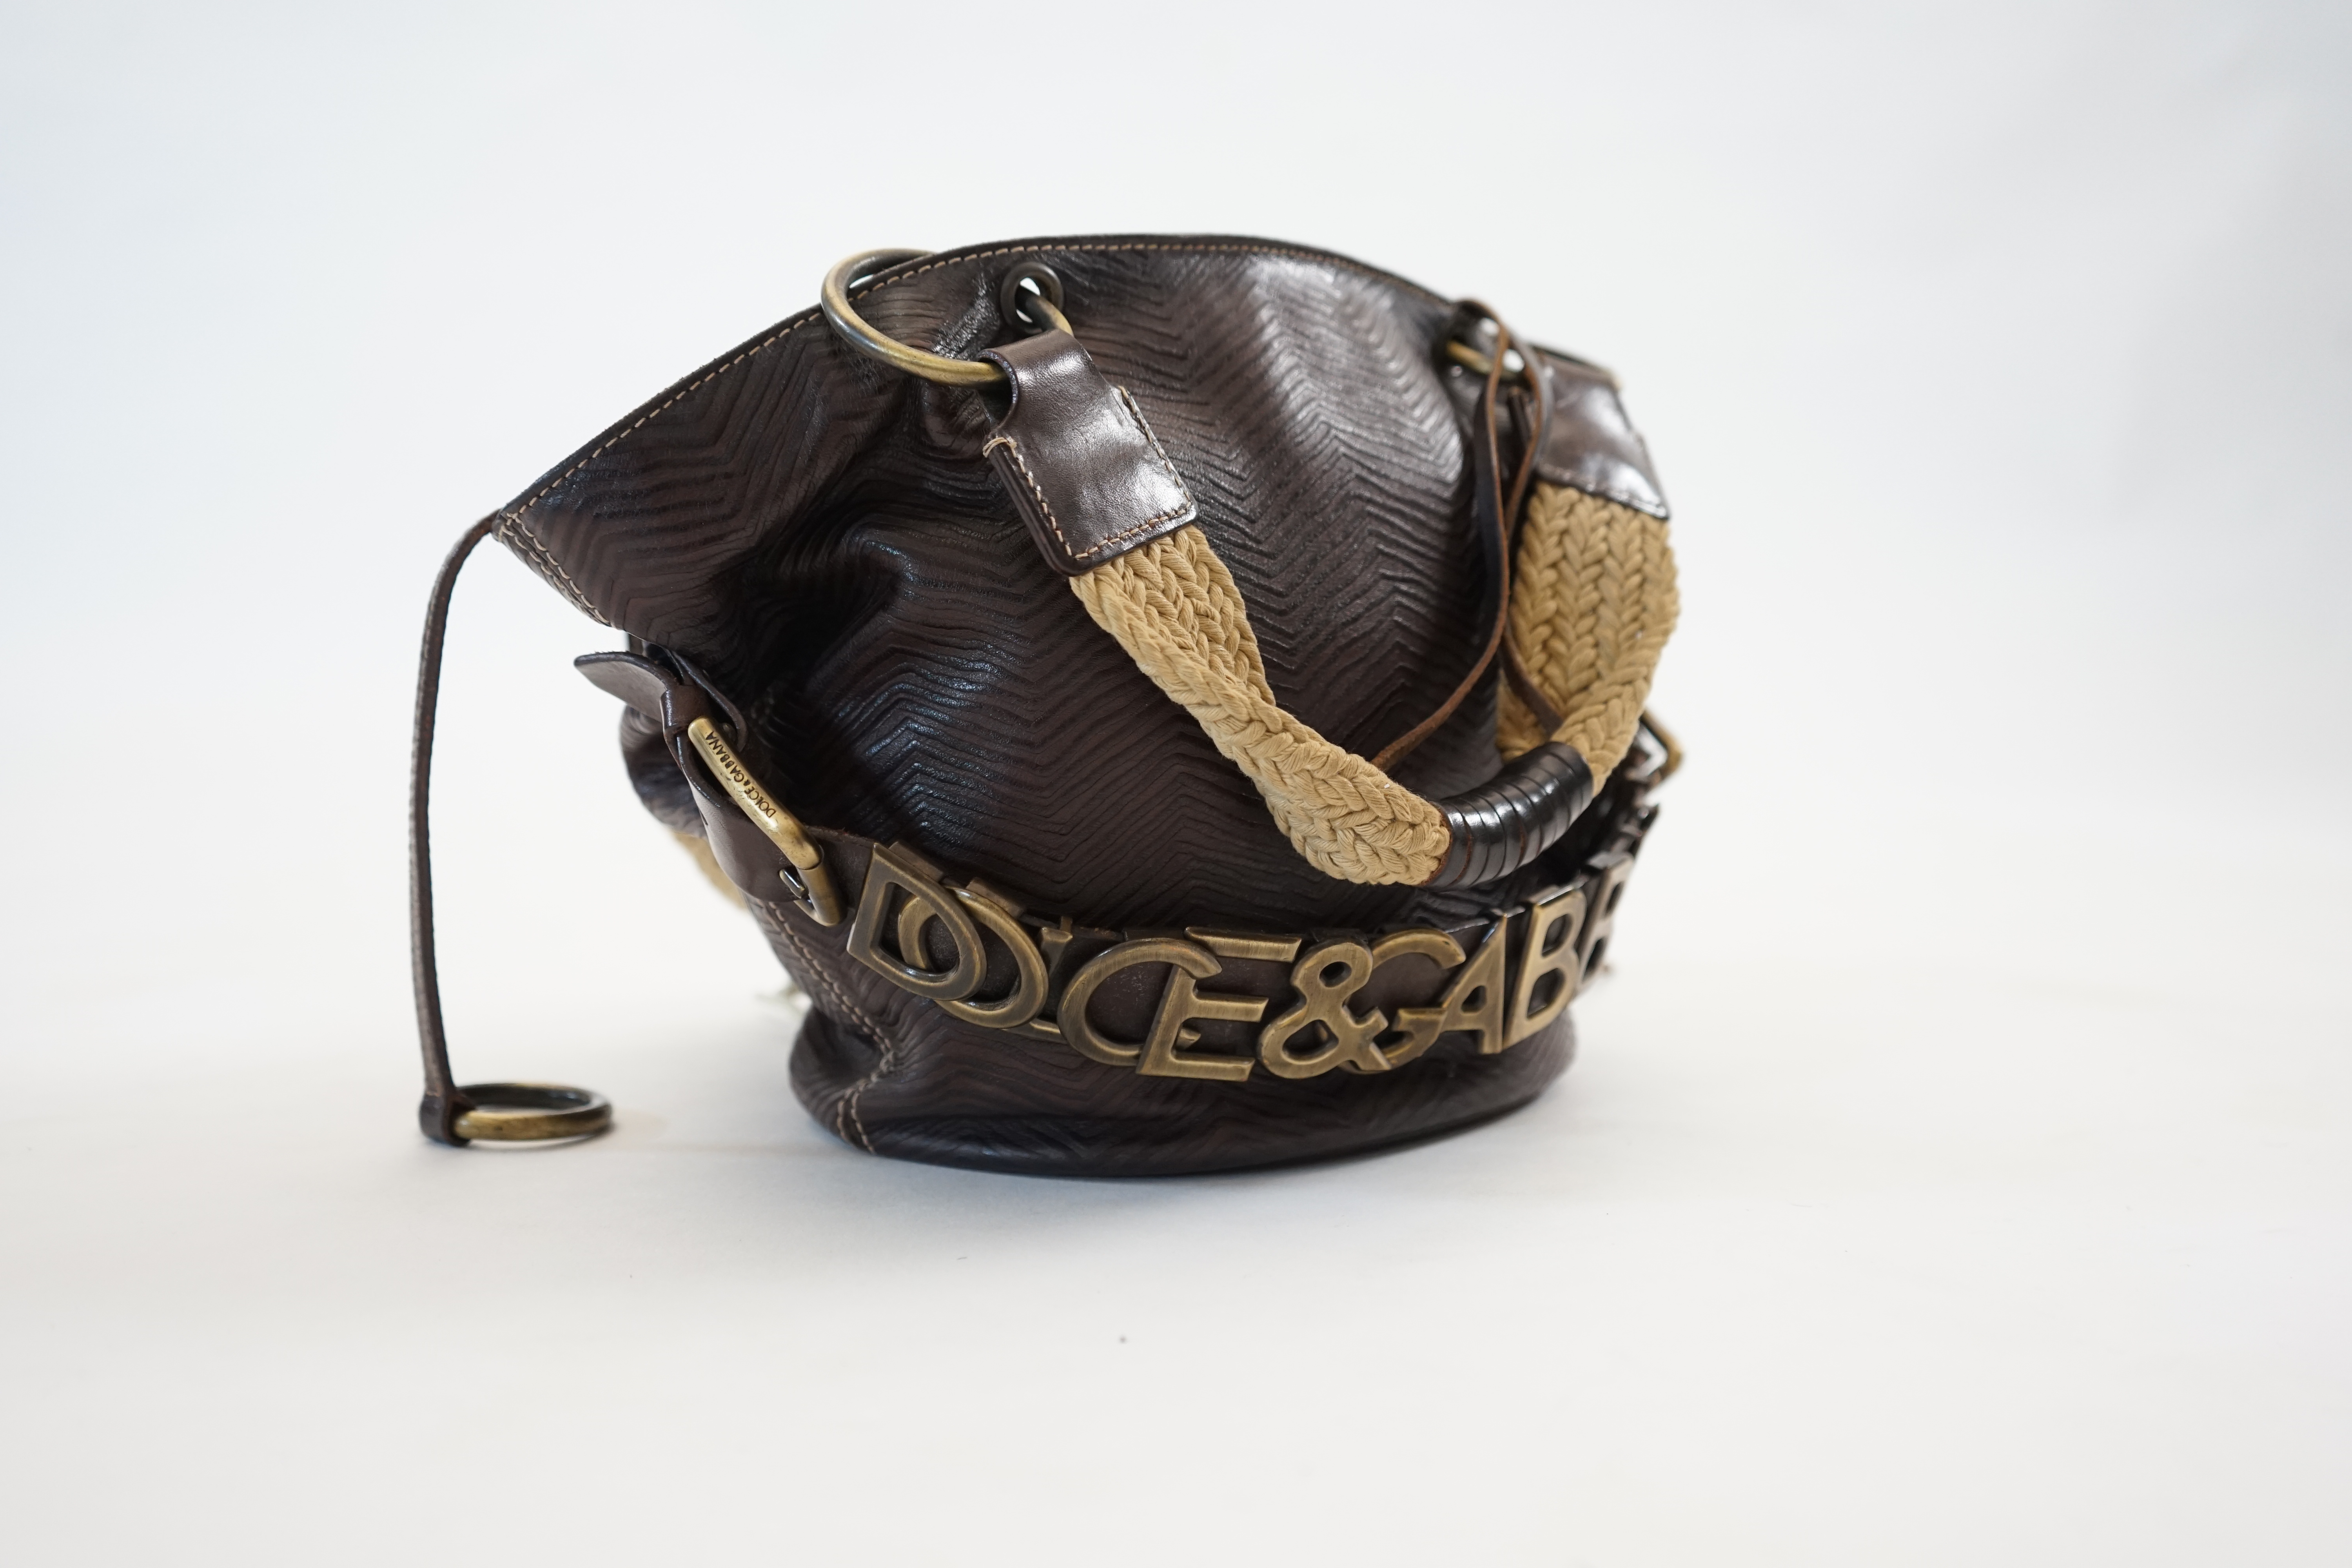 A Dolce & Gabbana brown and black leather bucket bag, width (max) 34cm, depth 14cm, height 20cm